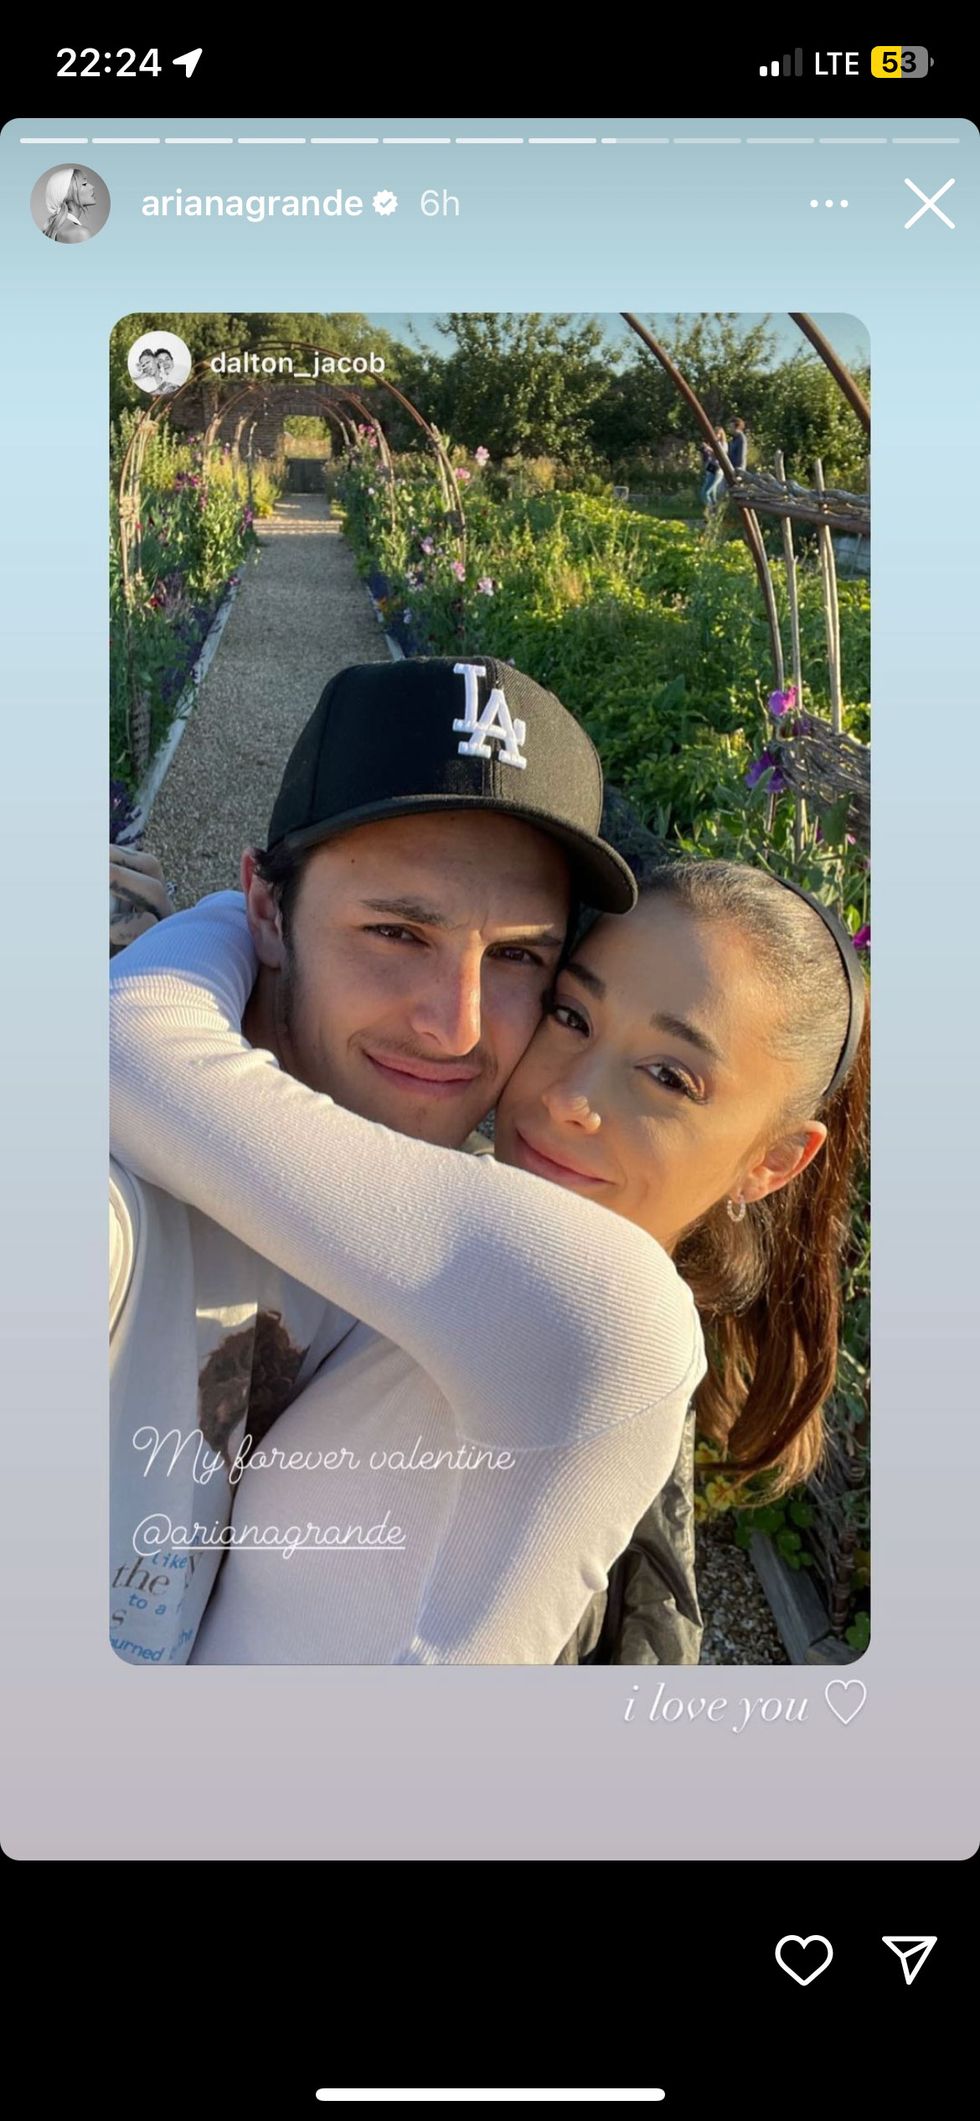 Ariana Grande's new boyfriend looks like her brother, fans say